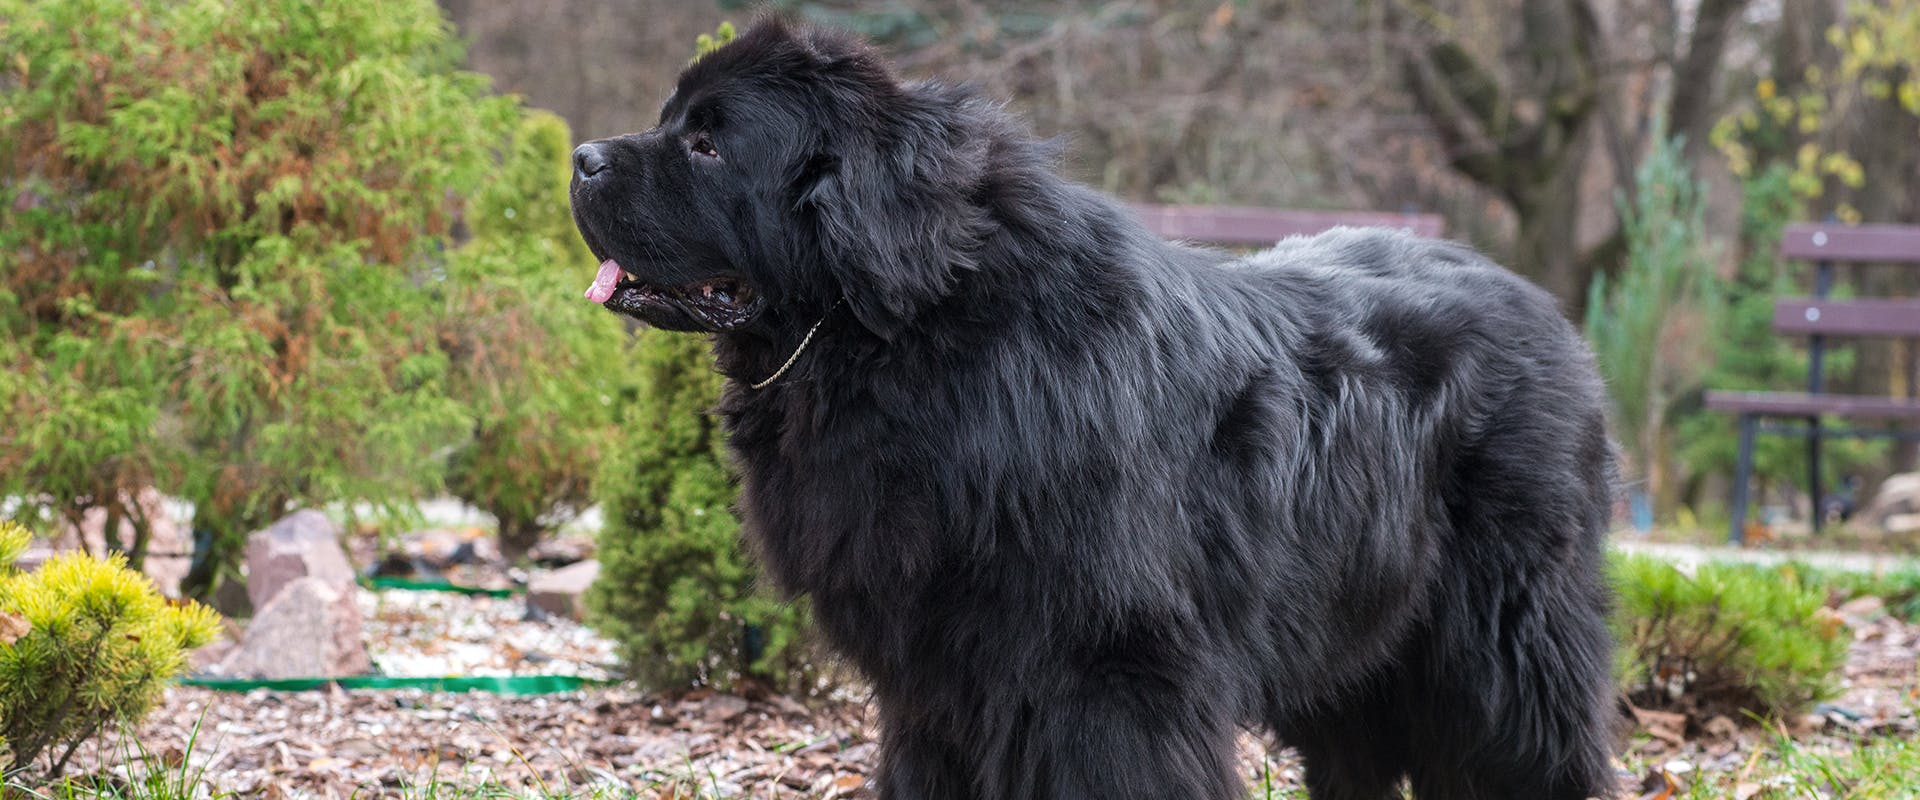 A Newfoundland dog standing in a park